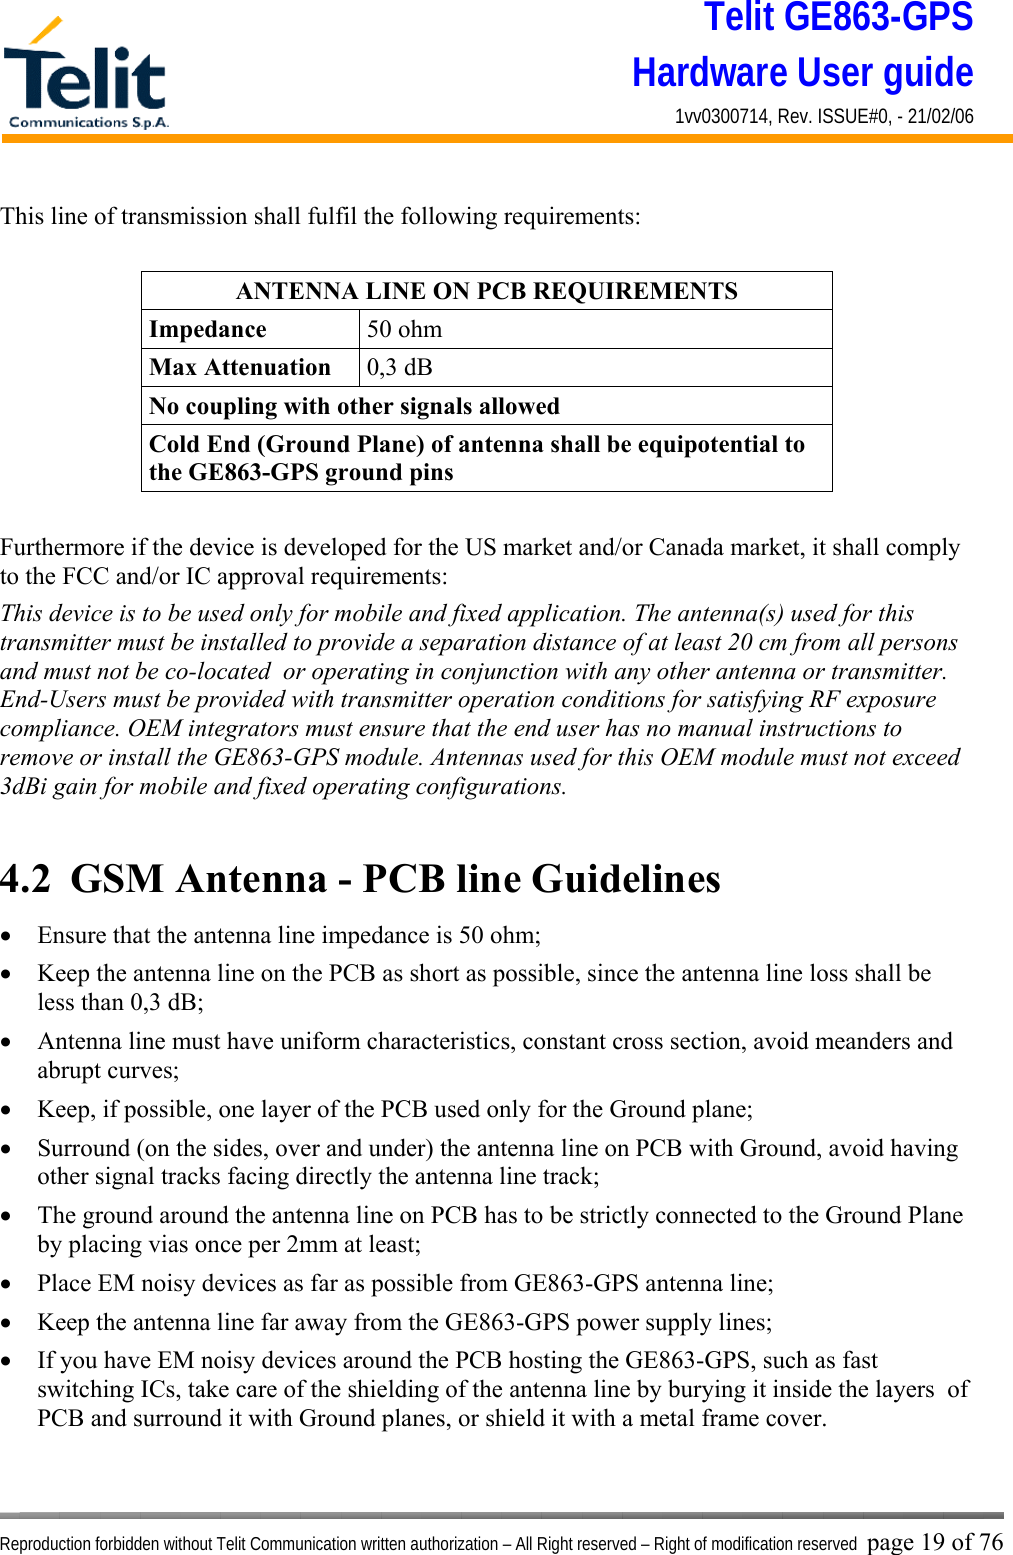 Telit GE863-GPS Hardware User guide 1vv0300714, Rev. ISSUE#0, - 21/02/06    Reproduction forbidden without Telit Communication written authorization – All Right reserved – Right of modification reserved page 19 of 76 This line of transmission shall fulfil the following requirements:  ANTENNA LINE ON PCB REQUIREMENTS Impedance  50 ohm Max Attenuation  0,3 dB No coupling with other signals allowed Cold End (Ground Plane) of antenna shall be equipotential to the GE863-GPS ground pins  Furthermore if the device is developed for the US market and/or Canada market, it shall comply to the FCC and/or IC approval requirements: This device is to be used only for mobile and fixed application. The antenna(s) used for this transmitter must be installed to provide a separation distance of at least 20 cm from all persons and must not be co-located  or operating in conjunction with any other antenna or transmitter. End-Users must be provided with transmitter operation conditions for satisfying RF exposure compliance. OEM integrators must ensure that the end user has no manual instructions to remove or install the GE863-GPS module. Antennas used for this OEM module must not exceed 3dBi gain for mobile and fixed operating configurations.  4.2  GSM Antenna - PCB line Guidelines •  Ensure that the antenna line impedance is 50 ohm; •  Keep the antenna line on the PCB as short as possible, since the antenna line loss shall be less than 0,3 dB; •  Antenna line must have uniform characteristics, constant cross section, avoid meanders and abrupt curves; •  Keep, if possible, one layer of the PCB used only for the Ground plane; •  Surround (on the sides, over and under) the antenna line on PCB with Ground, avoid having other signal tracks facing directly the antenna line track; •  The ground around the antenna line on PCB has to be strictly connected to the Ground Plane by placing vias once per 2mm at least; •  Place EM noisy devices as far as possible from GE863-GPS antenna line; •  Keep the antenna line far away from the GE863-GPS power supply lines; •  If you have EM noisy devices around the PCB hosting the GE863-GPS, such as fast switching ICs, take care of the shielding of the antenna line by burying it inside the layers  of PCB and surround it with Ground planes, or shield it with a metal frame cover. 